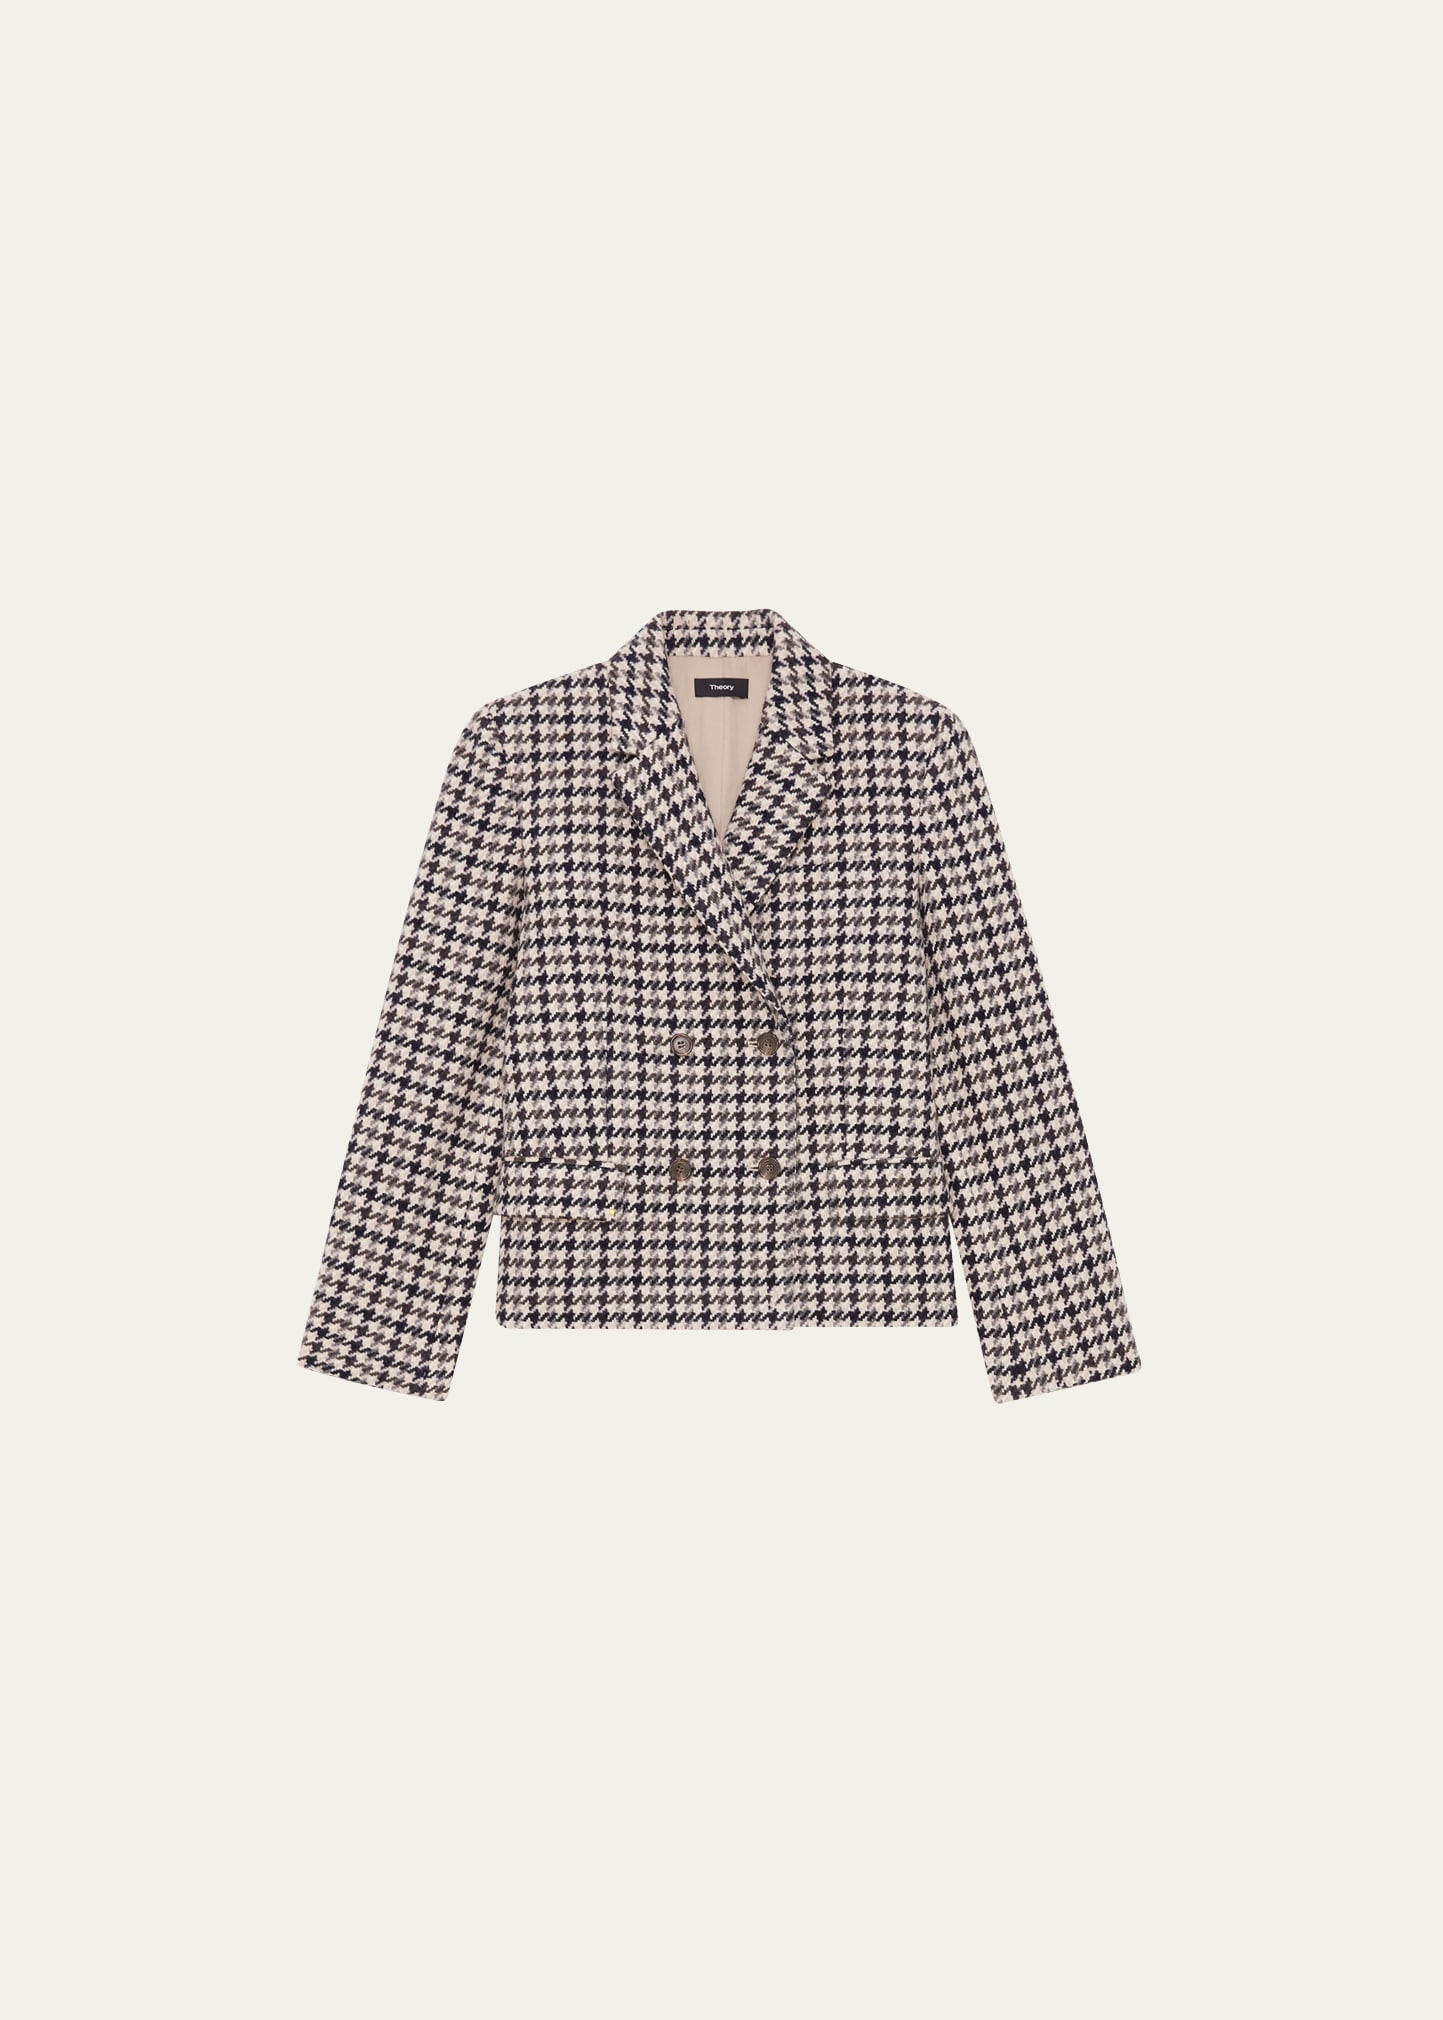 P.A.R.O.S.H. double-breasted Wool Coat - Farfetch